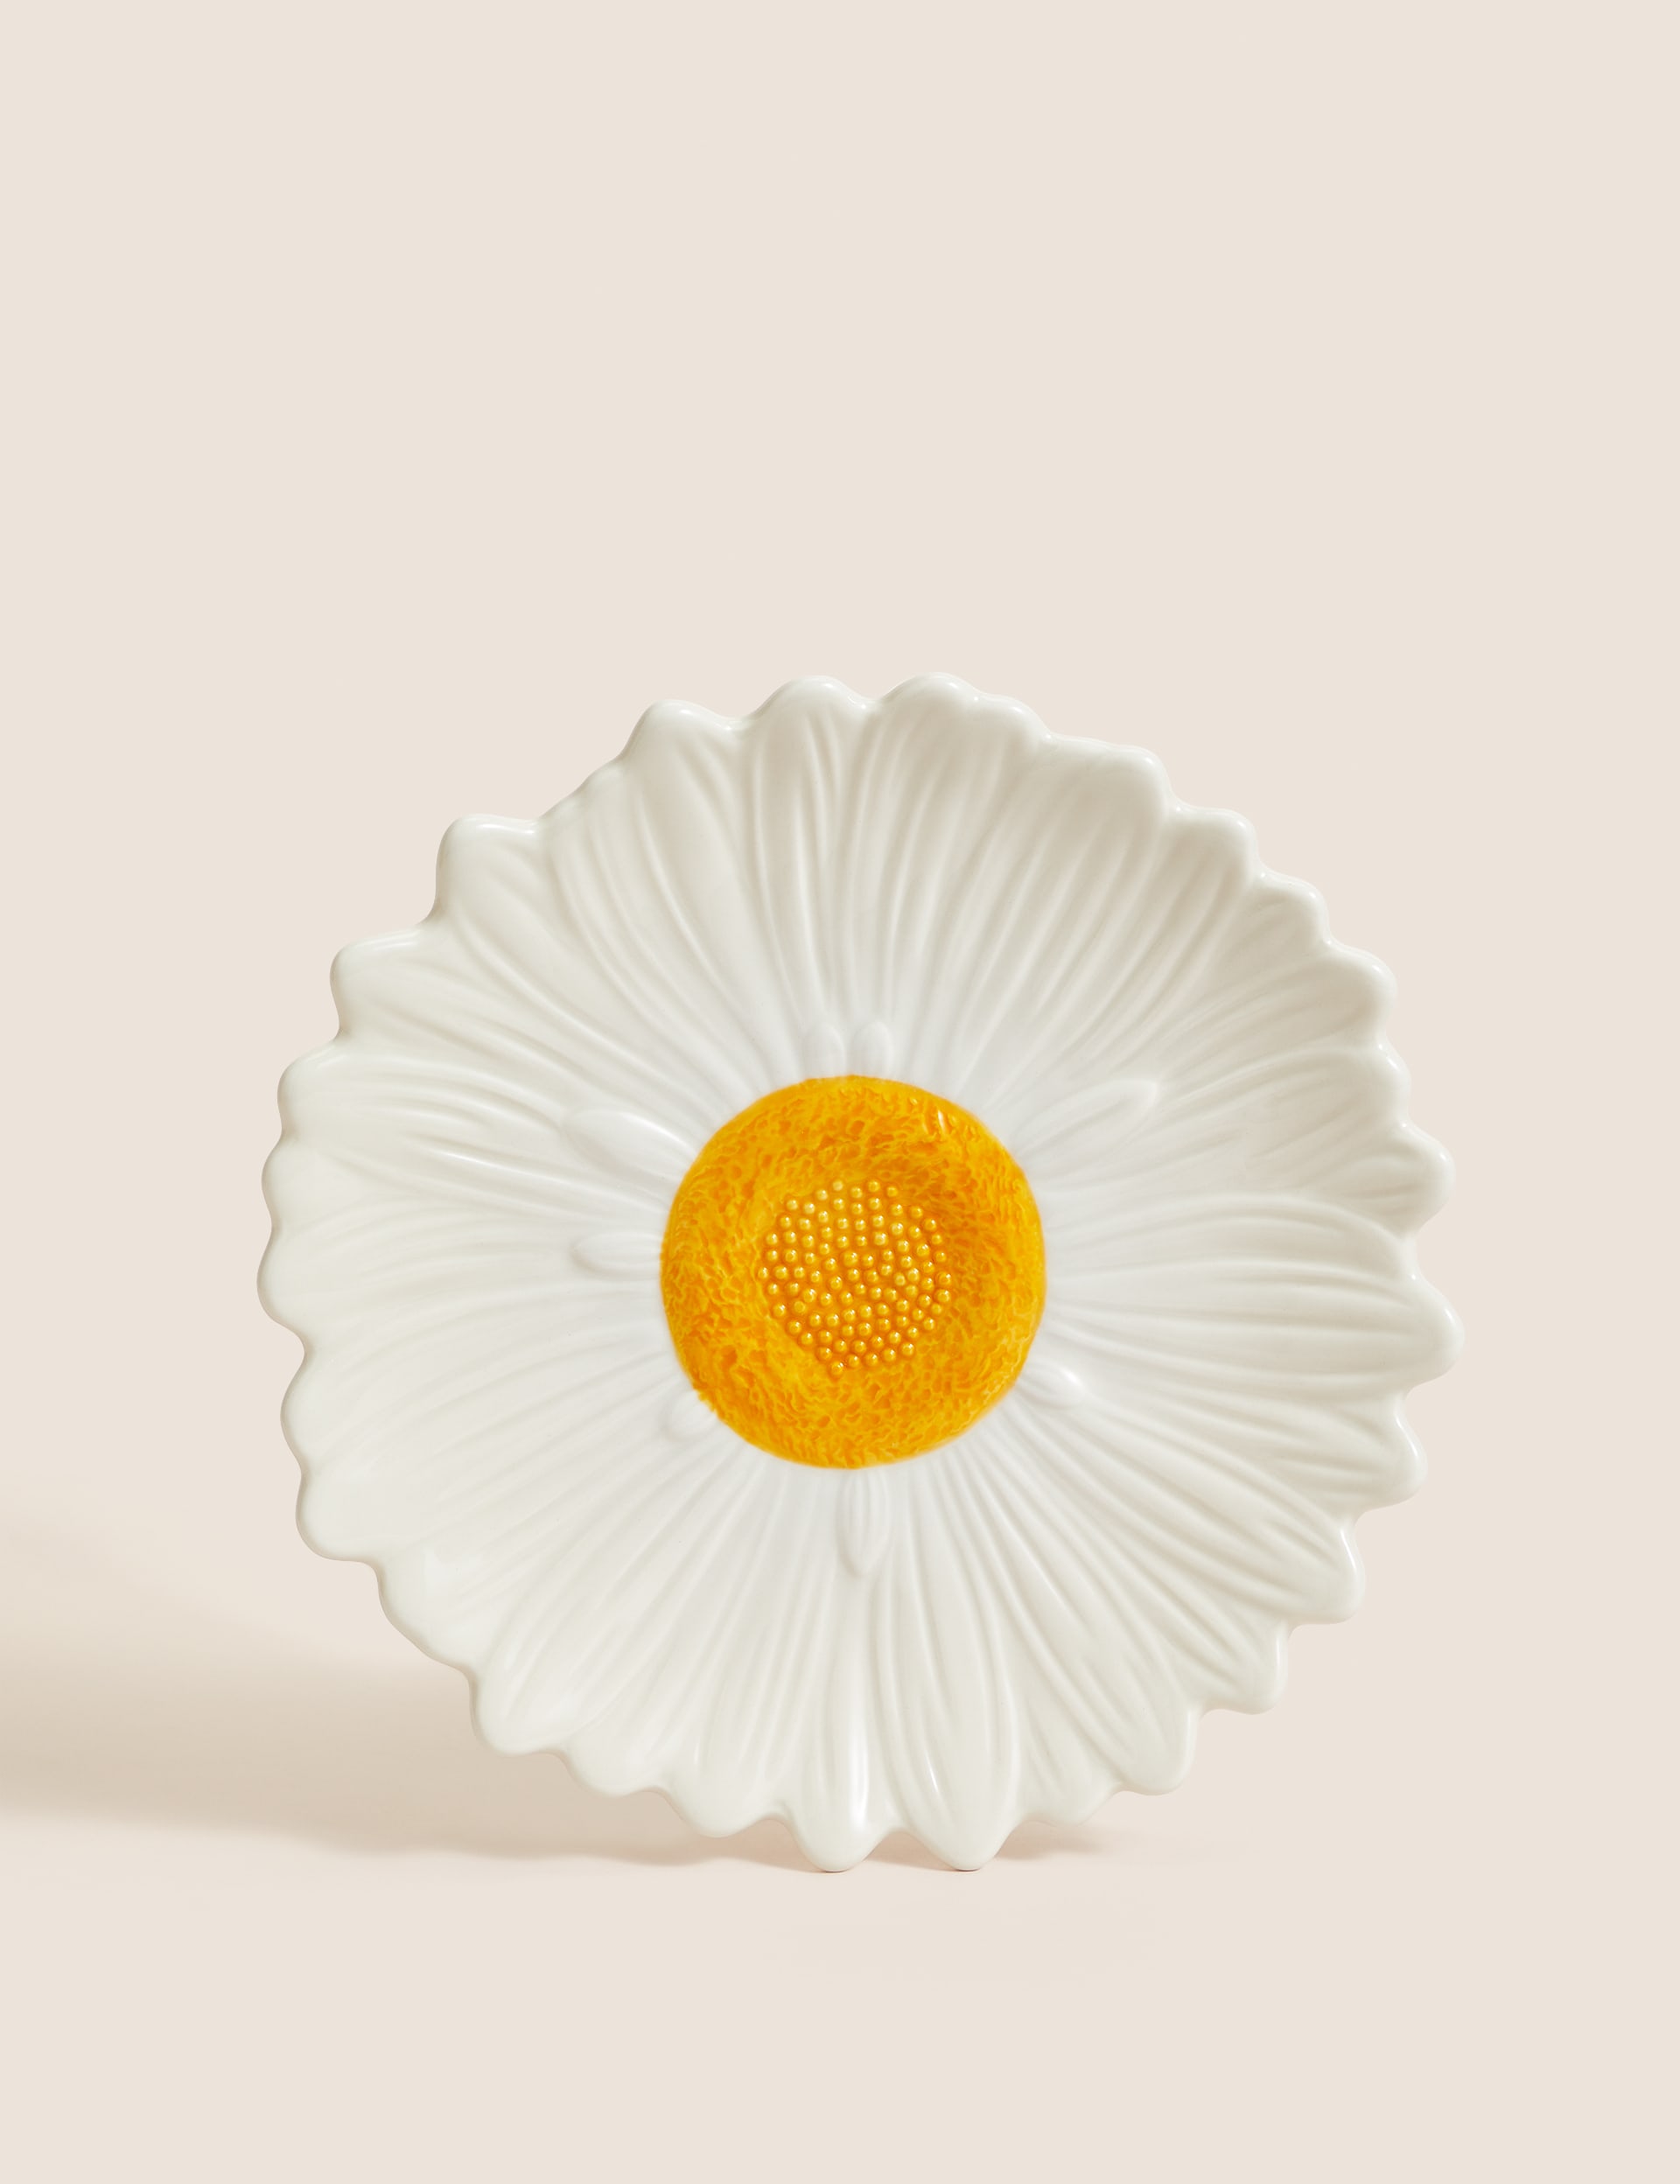 Daisy Side Serving Plate